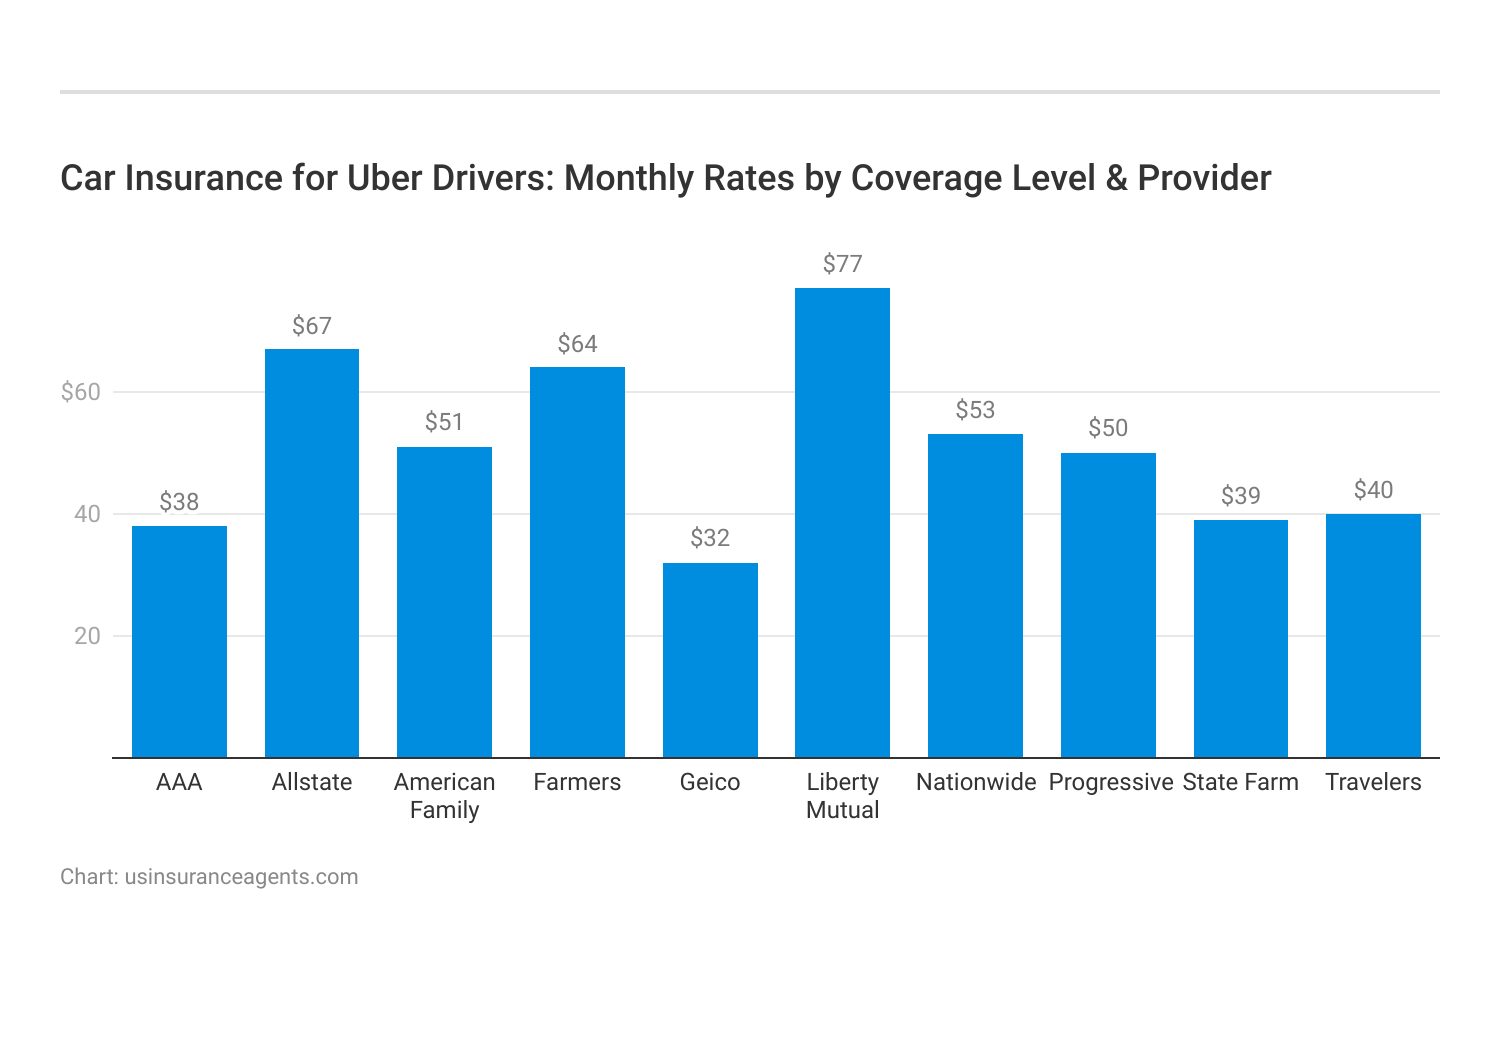 <h3>Car Insurance for Uber Drivers: Monthly Rates by Coverage Level & Provider</h3>